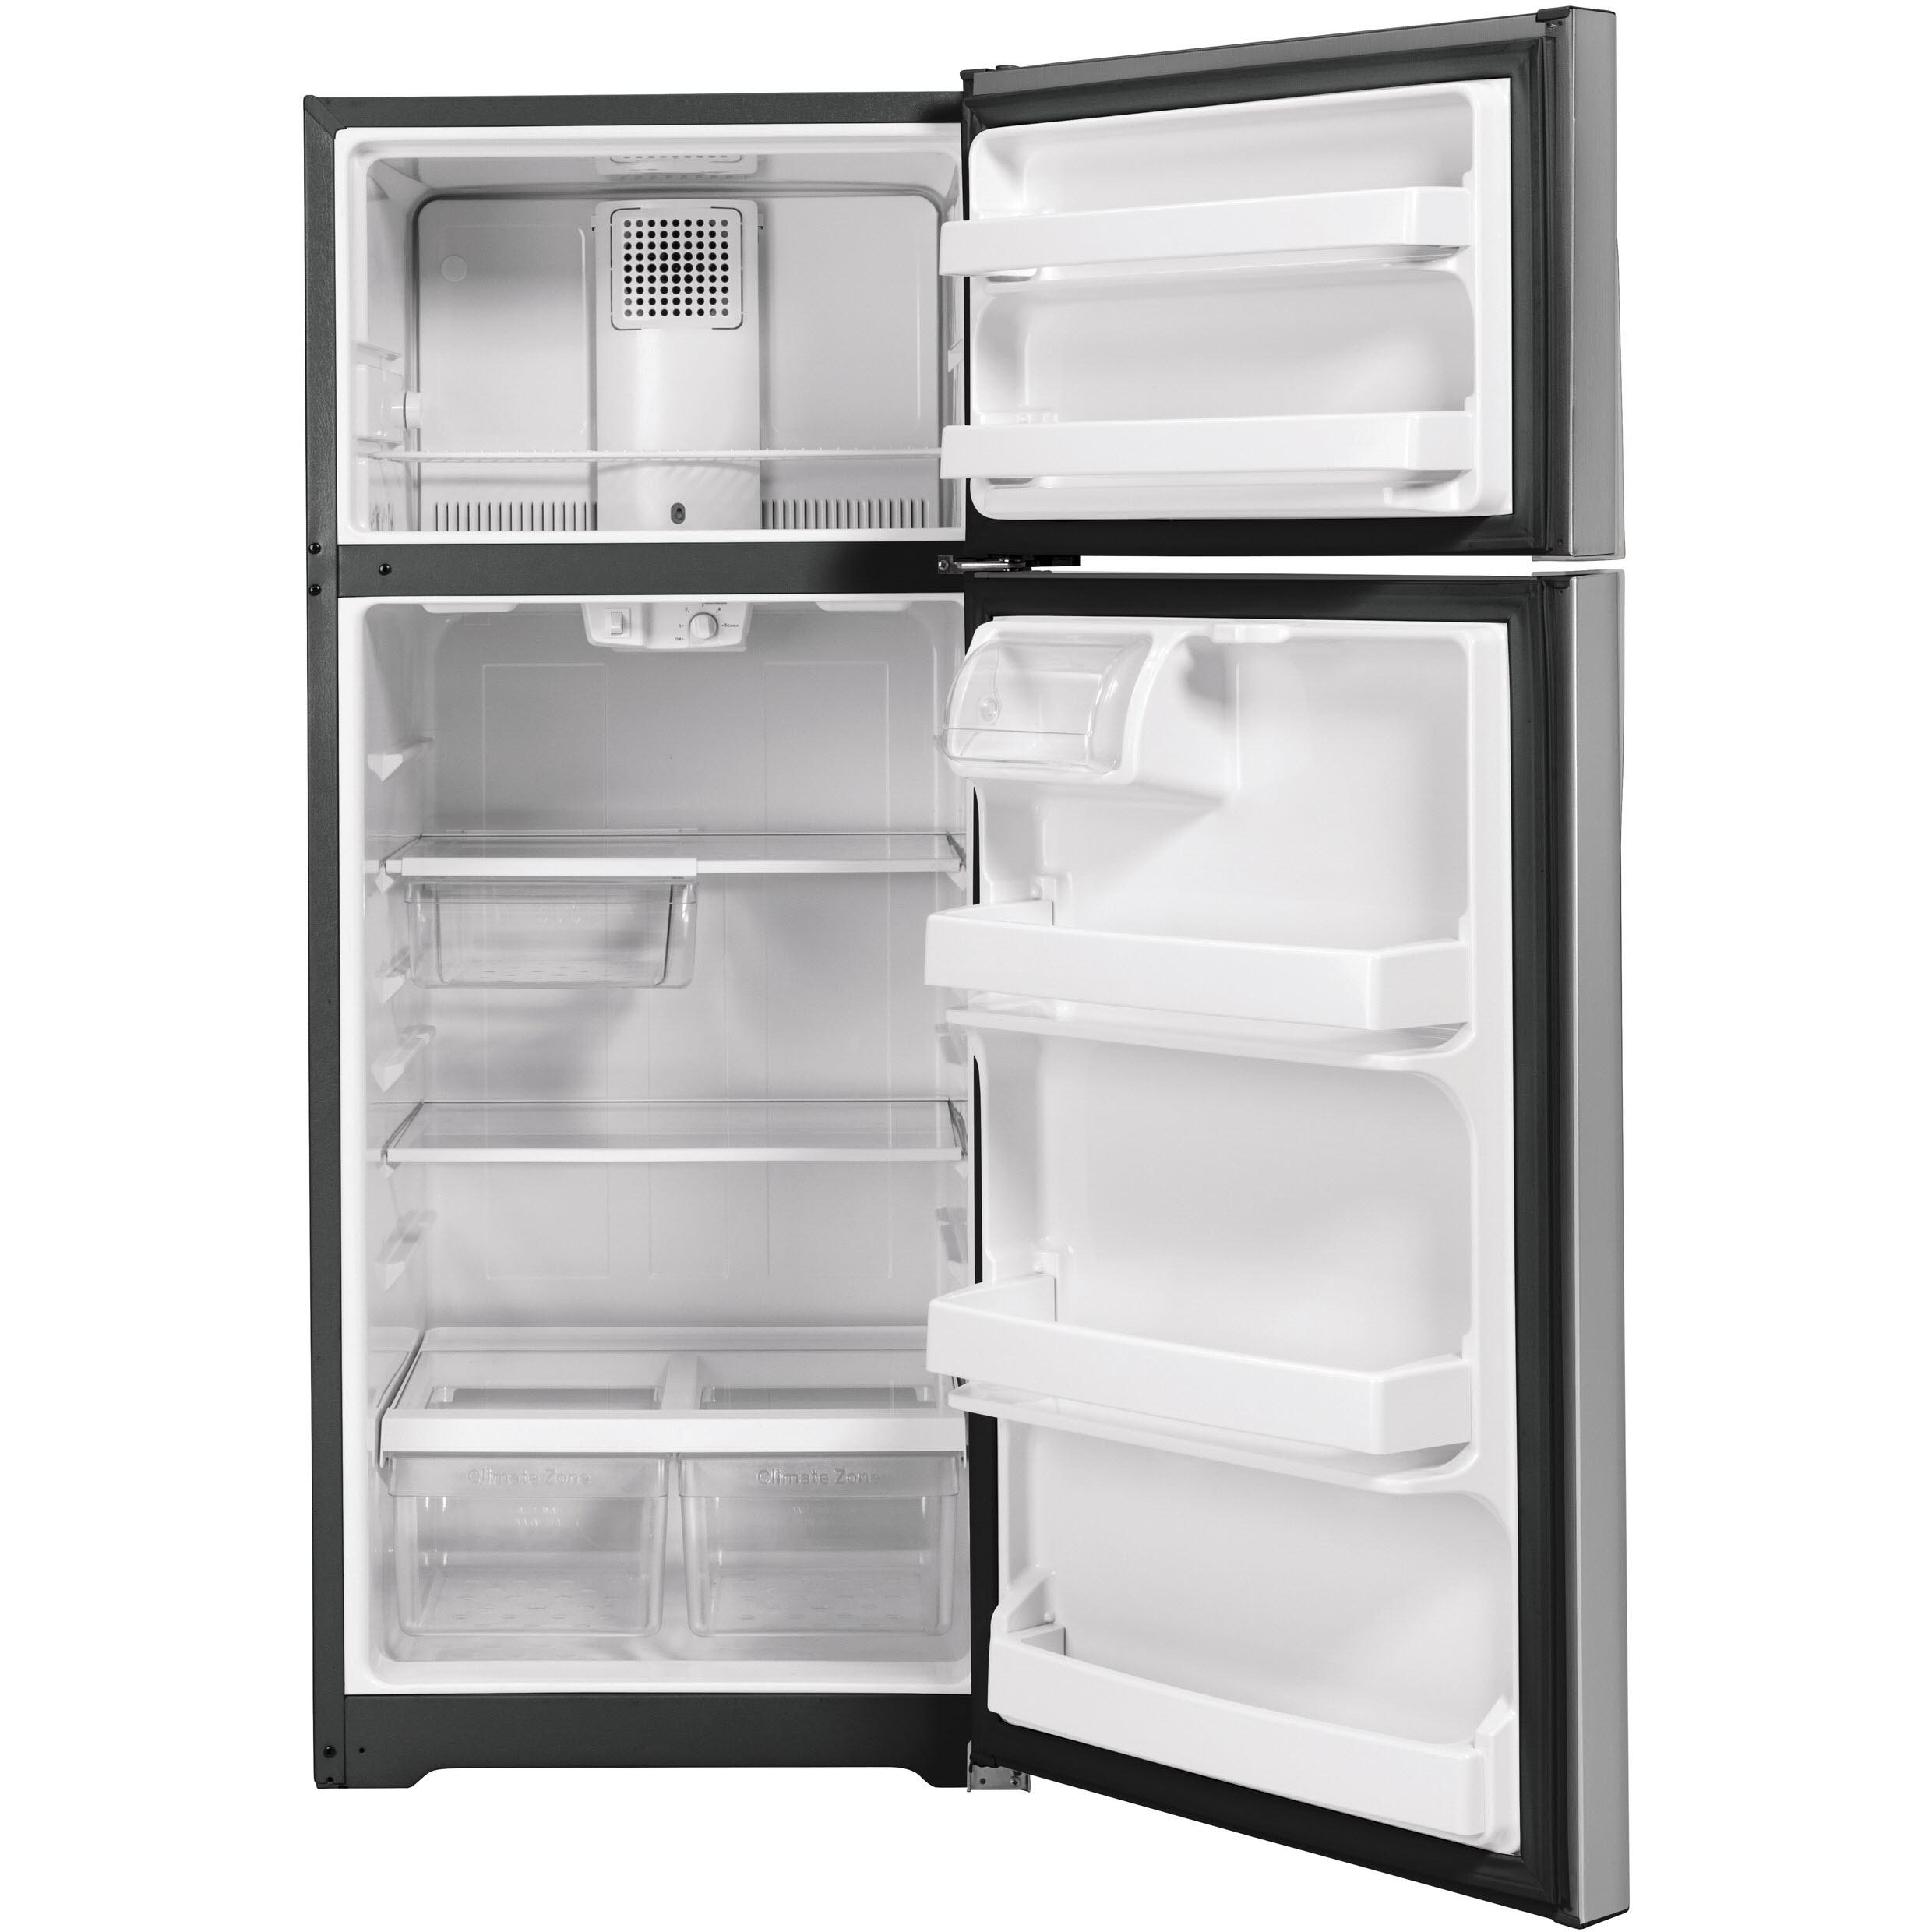 GE 28-inch, 17.5 cu.ft. Freestanding Top Freezer Refrigerator with LED Lighting GTS18GSNRSS